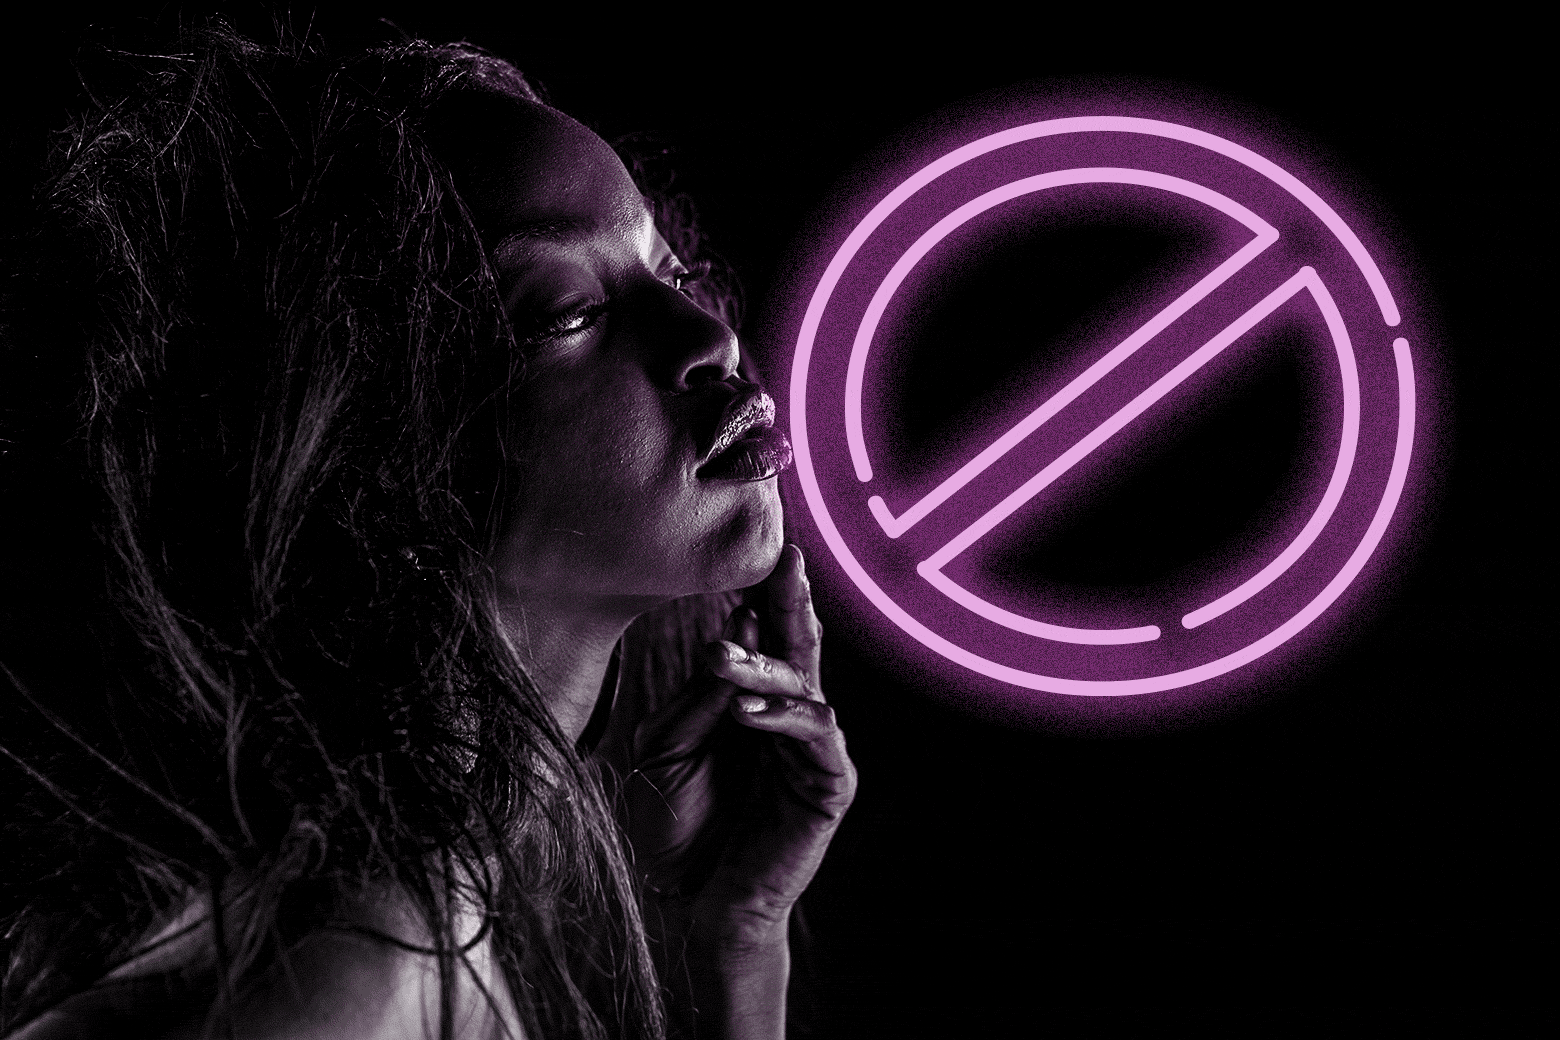 A woman holds her hand under her chin as if in thought. A do not enter sign flashes in neon behind her.